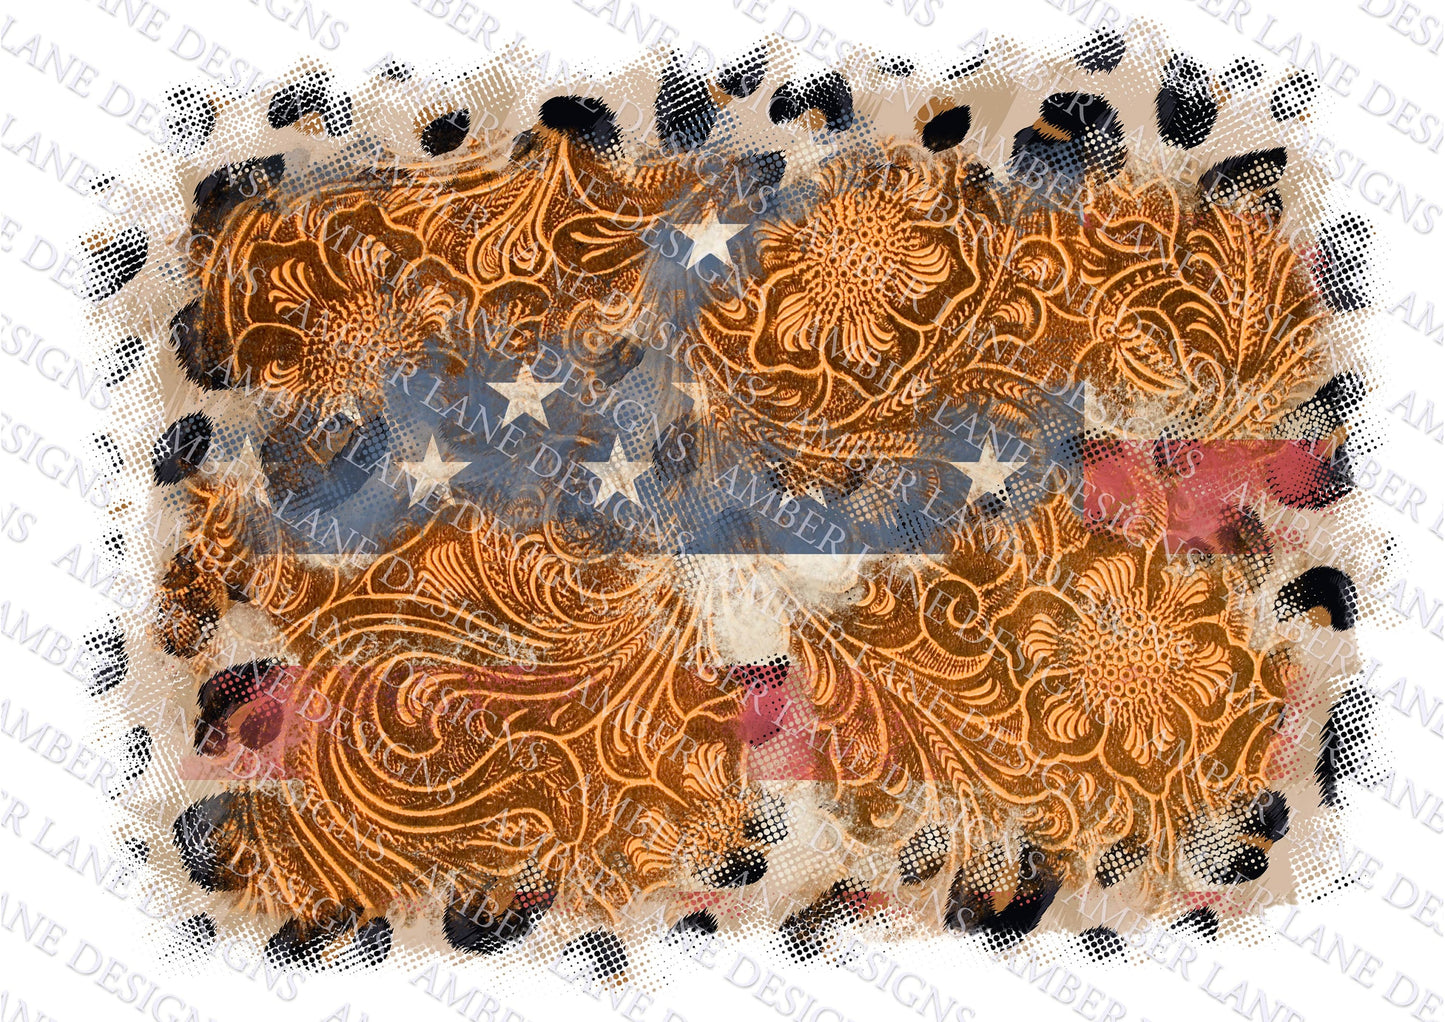 USA distressed flag with leopard frame and tooled leather, Western file, 4th July American flag, png background